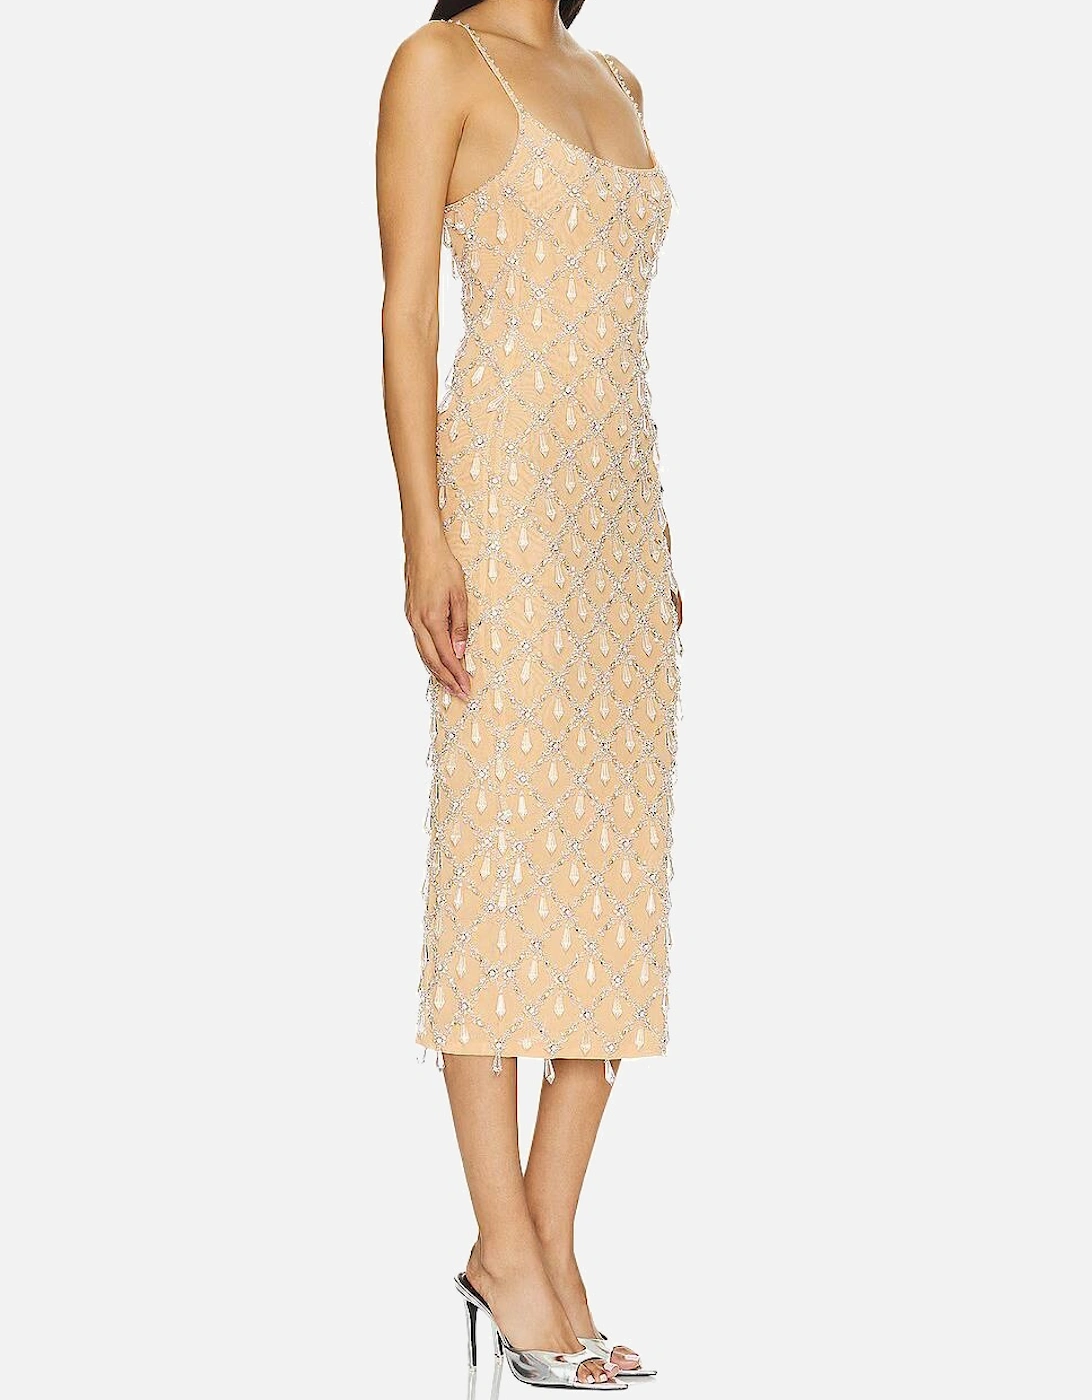 Calliope Luxury Crystal Nude Maxi Party Dress